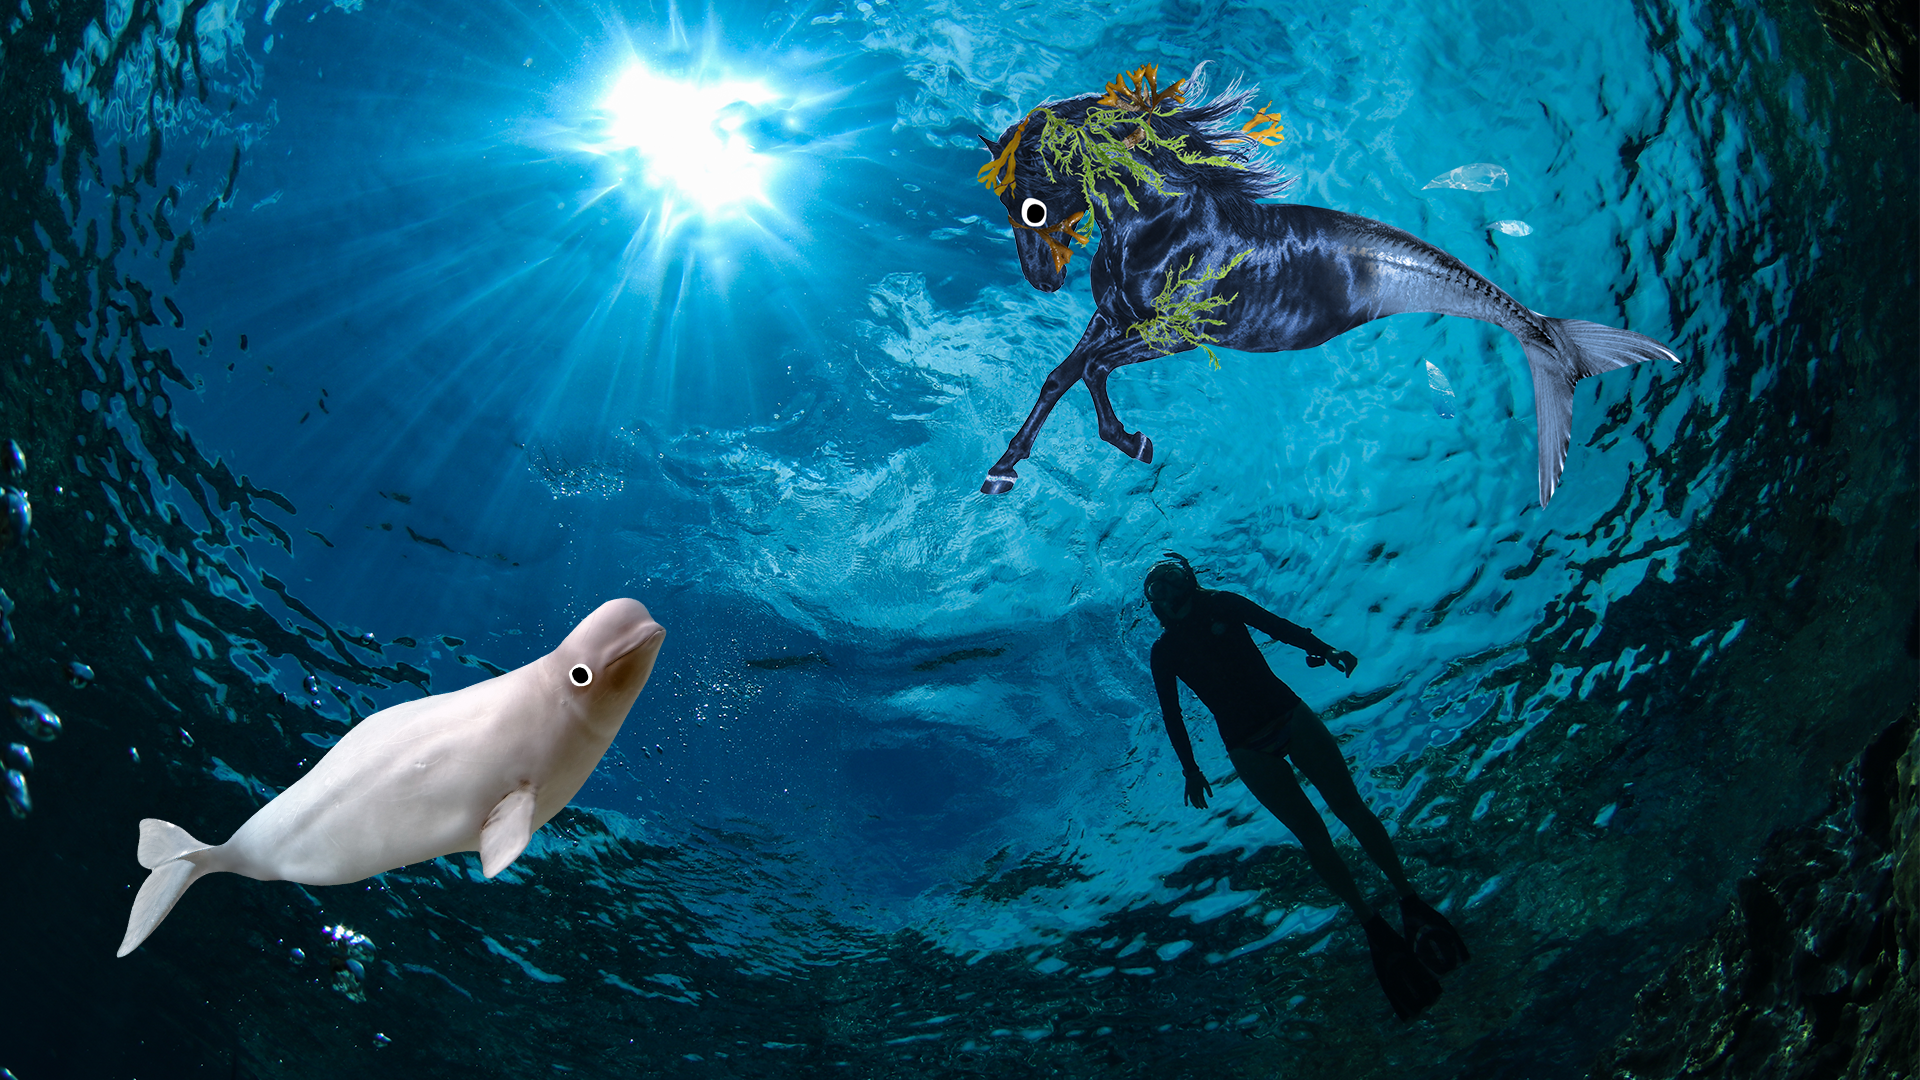 Creatures and a human swimming underwater